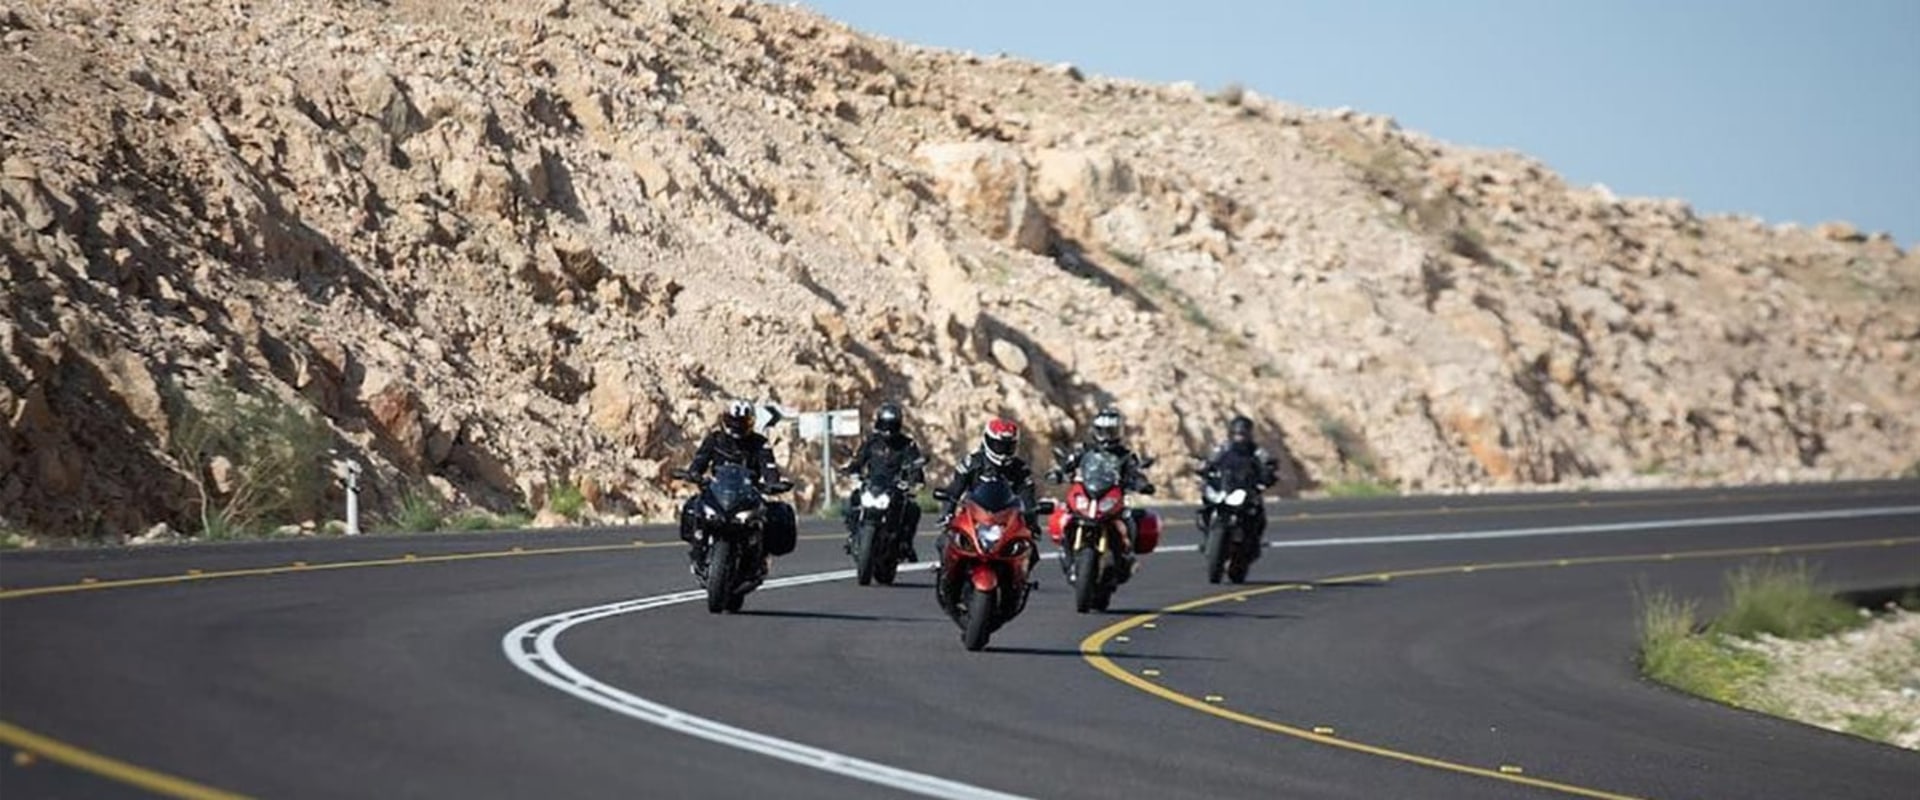 Preparing for Sudden Stops: A Motorcycle Safety and Road Awareness Guide